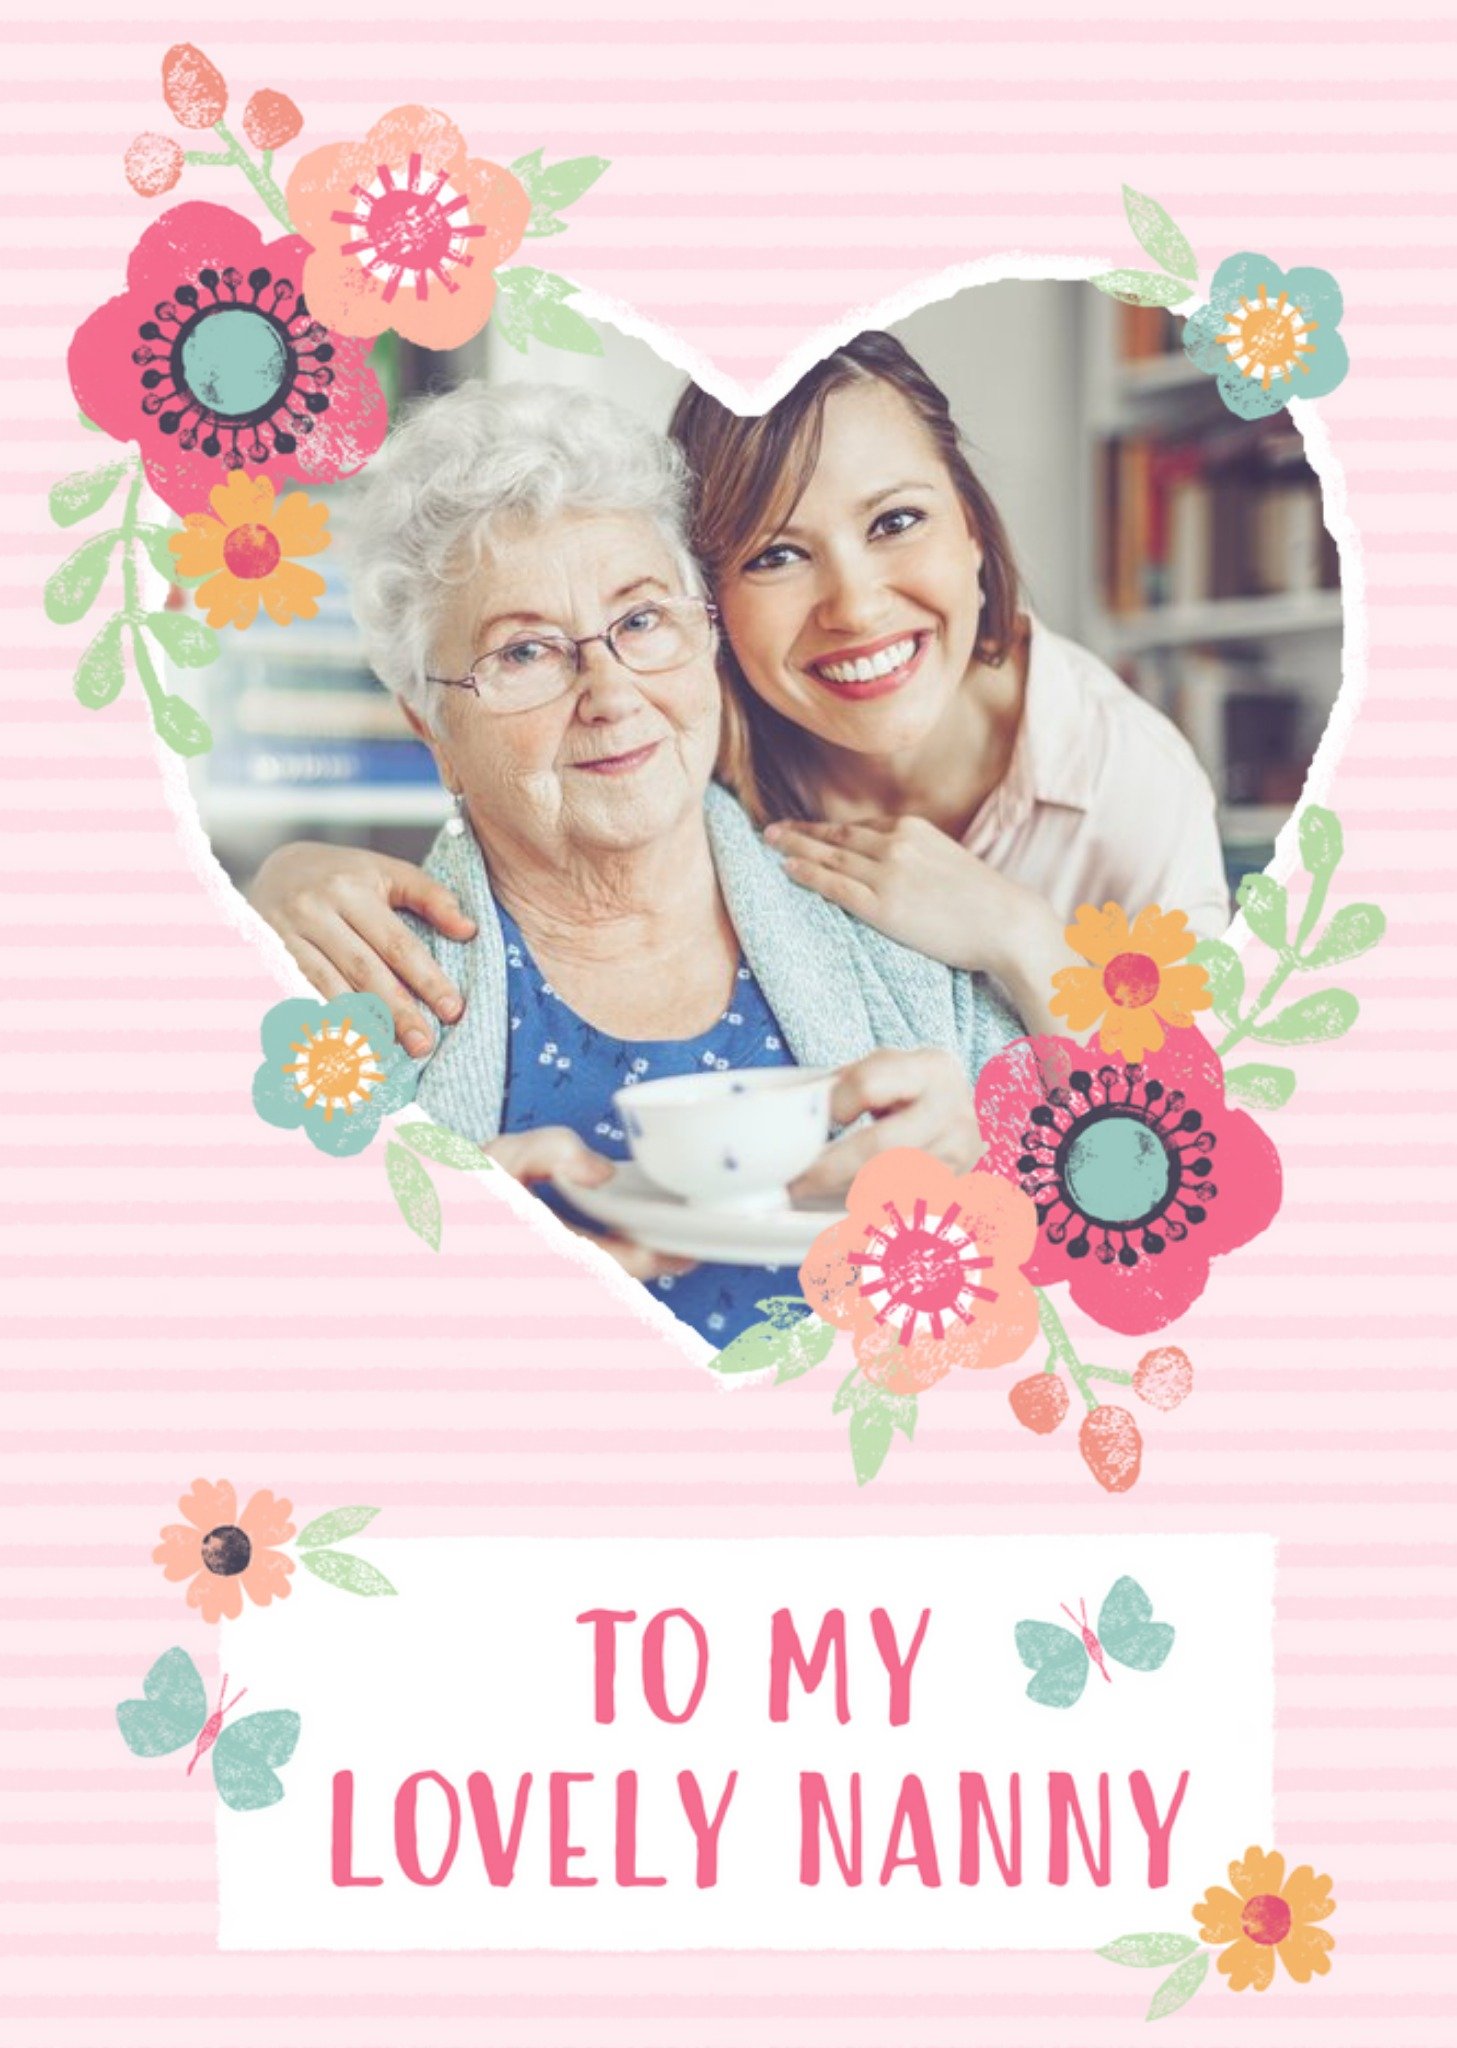 Moonpig Striped And Flower Design To My Lovely Nanny Mothers Day Photo Card, Large